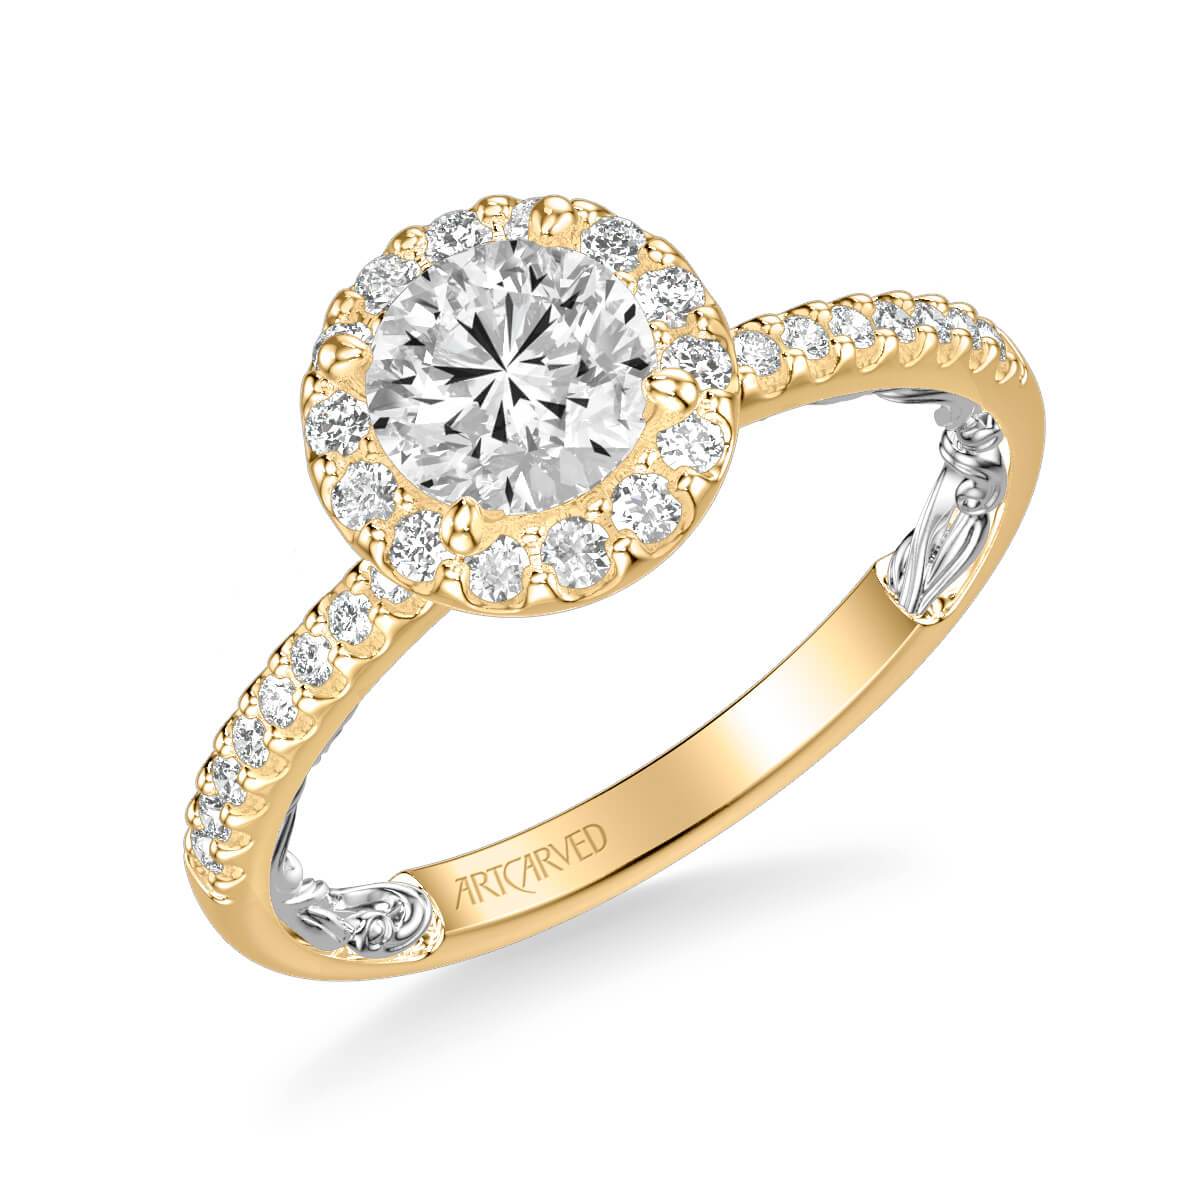 Winifred Lyric Collection Classic Side Stone Diamond Engagement Ring